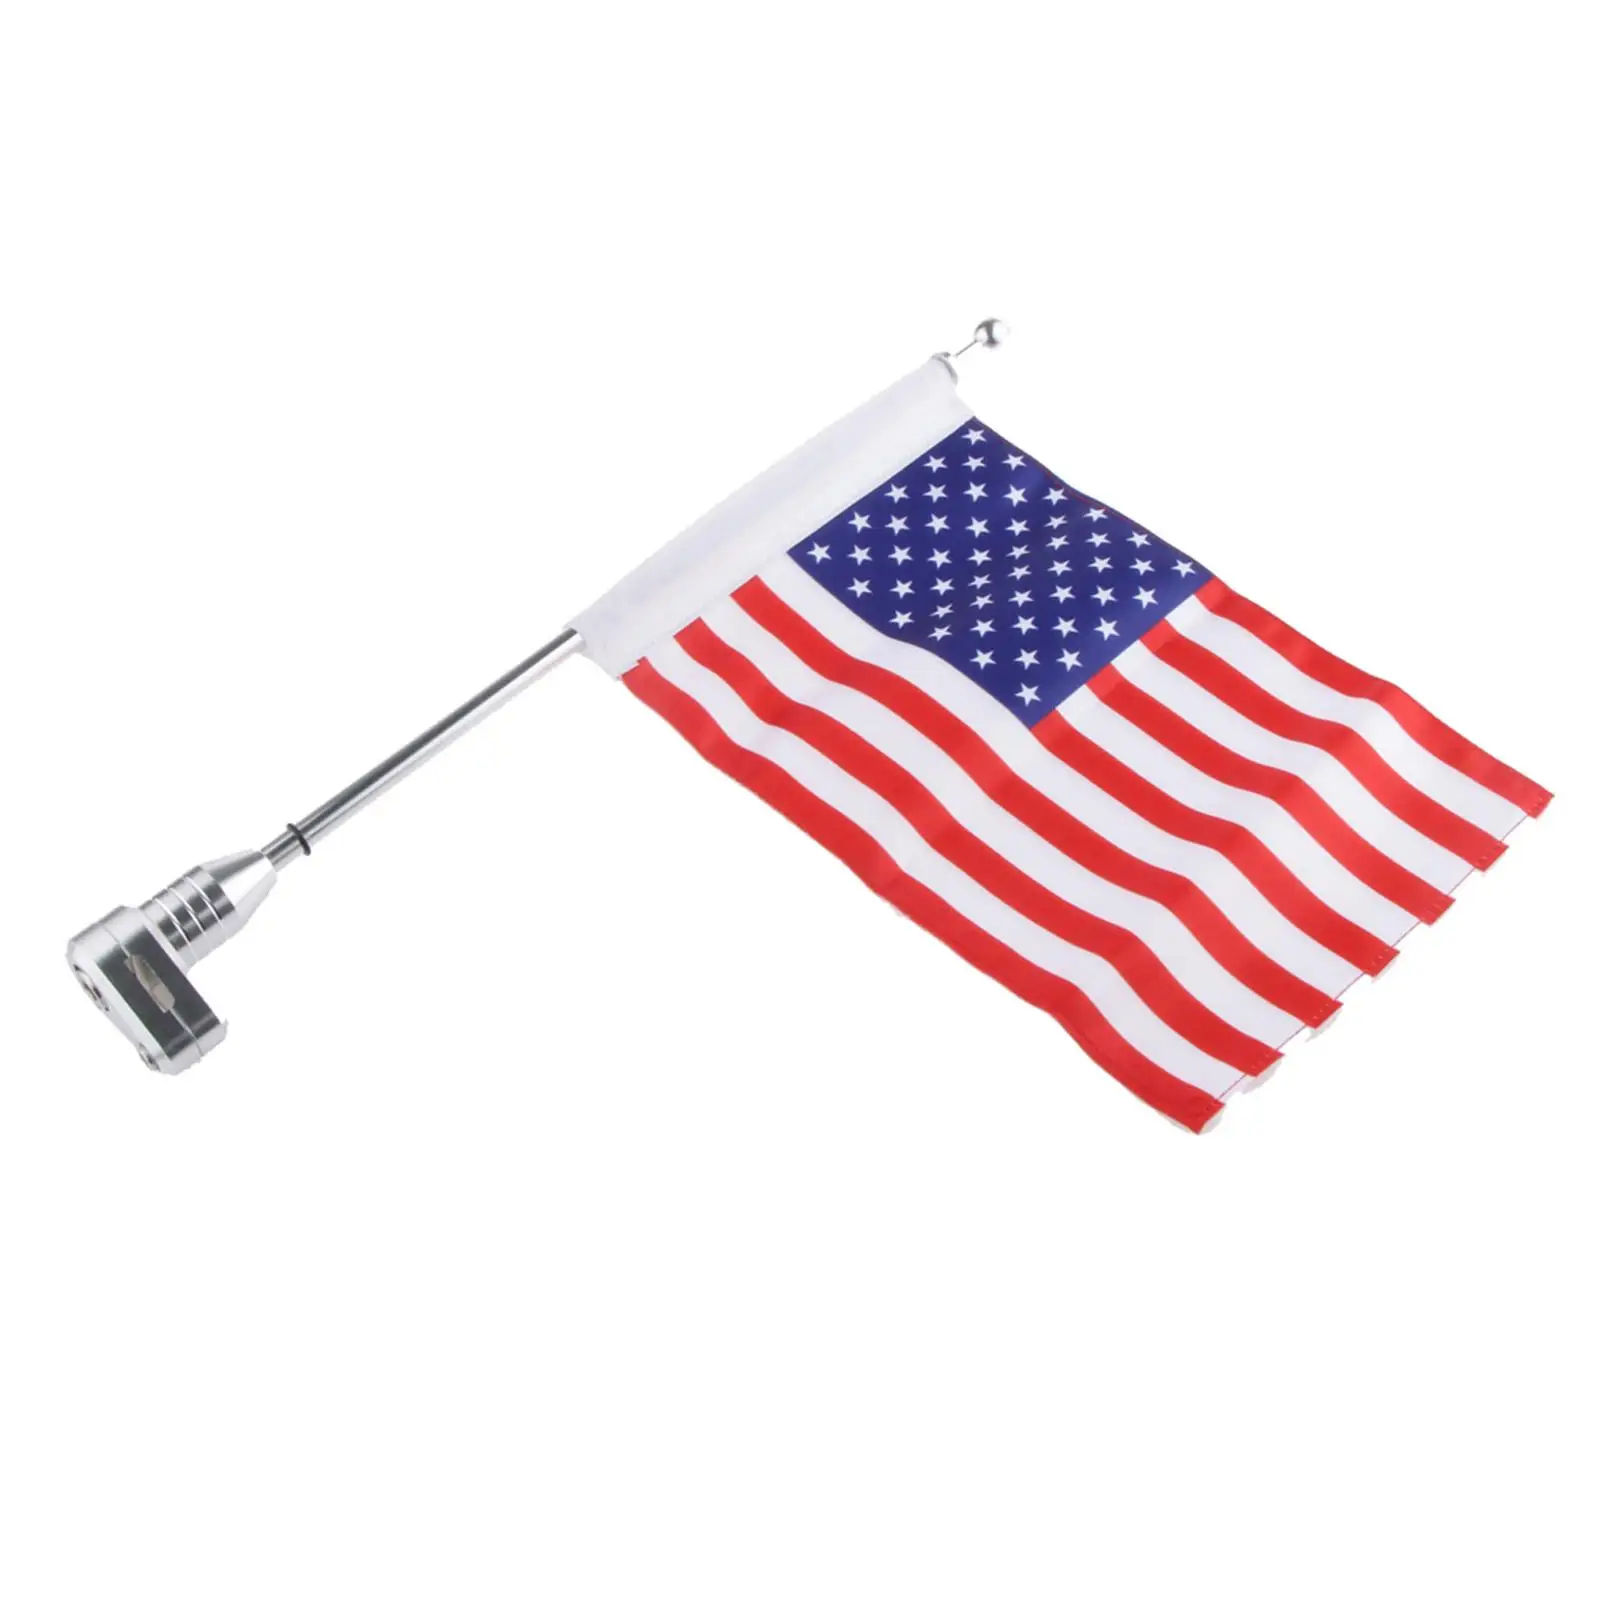 Motorcycle American With Aluminum Pole 10x6 Inch for XL883